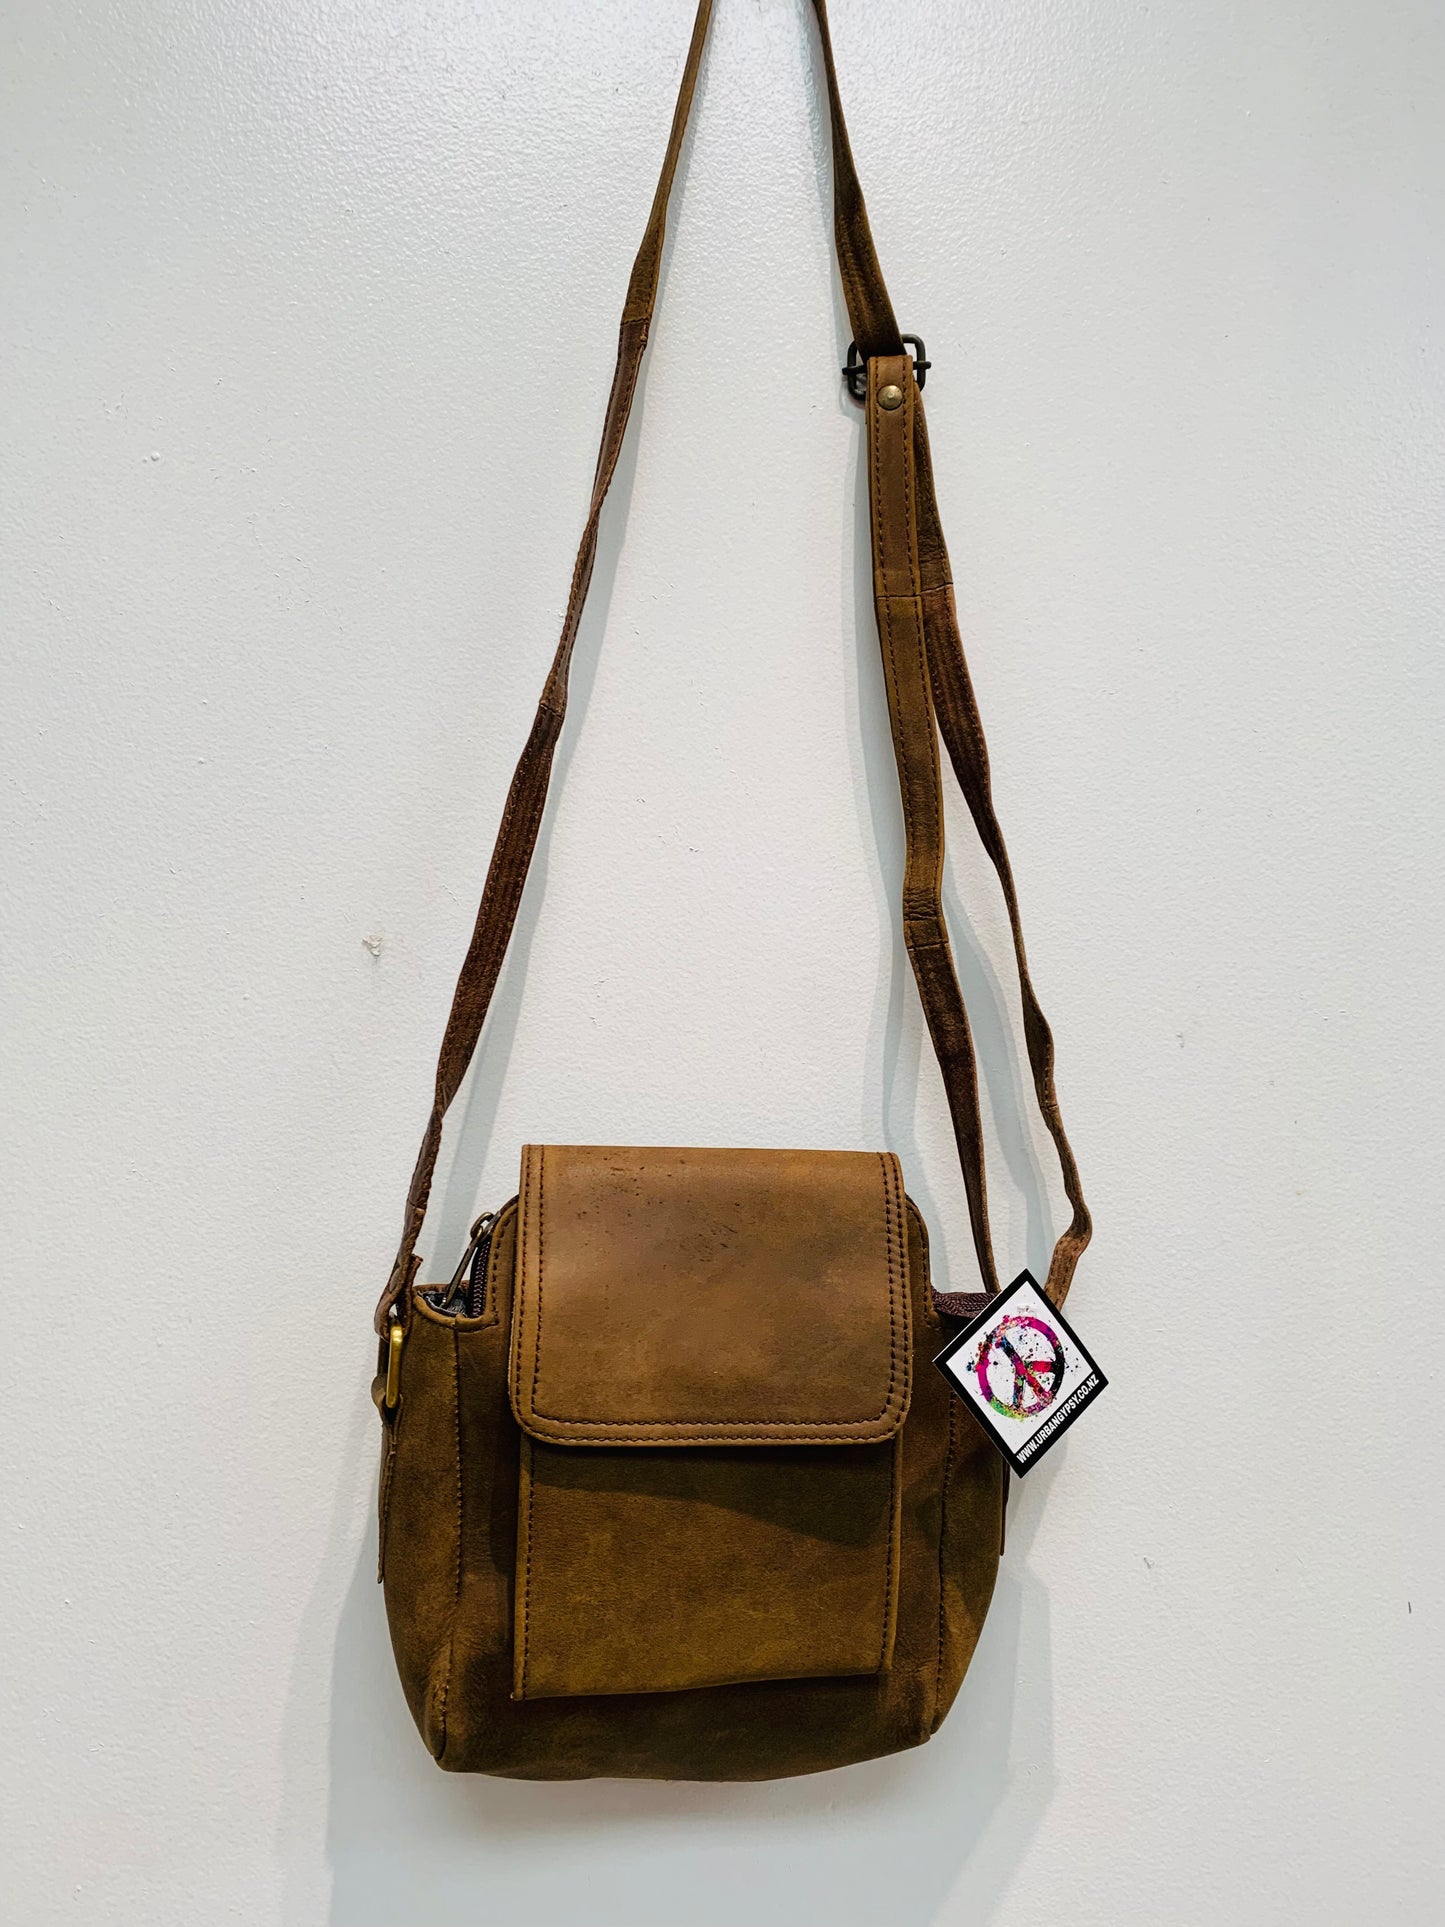 BOHEMIAN STATEMENT HANDCRAFTED GENUINE LEATHER BAG #LEA1030